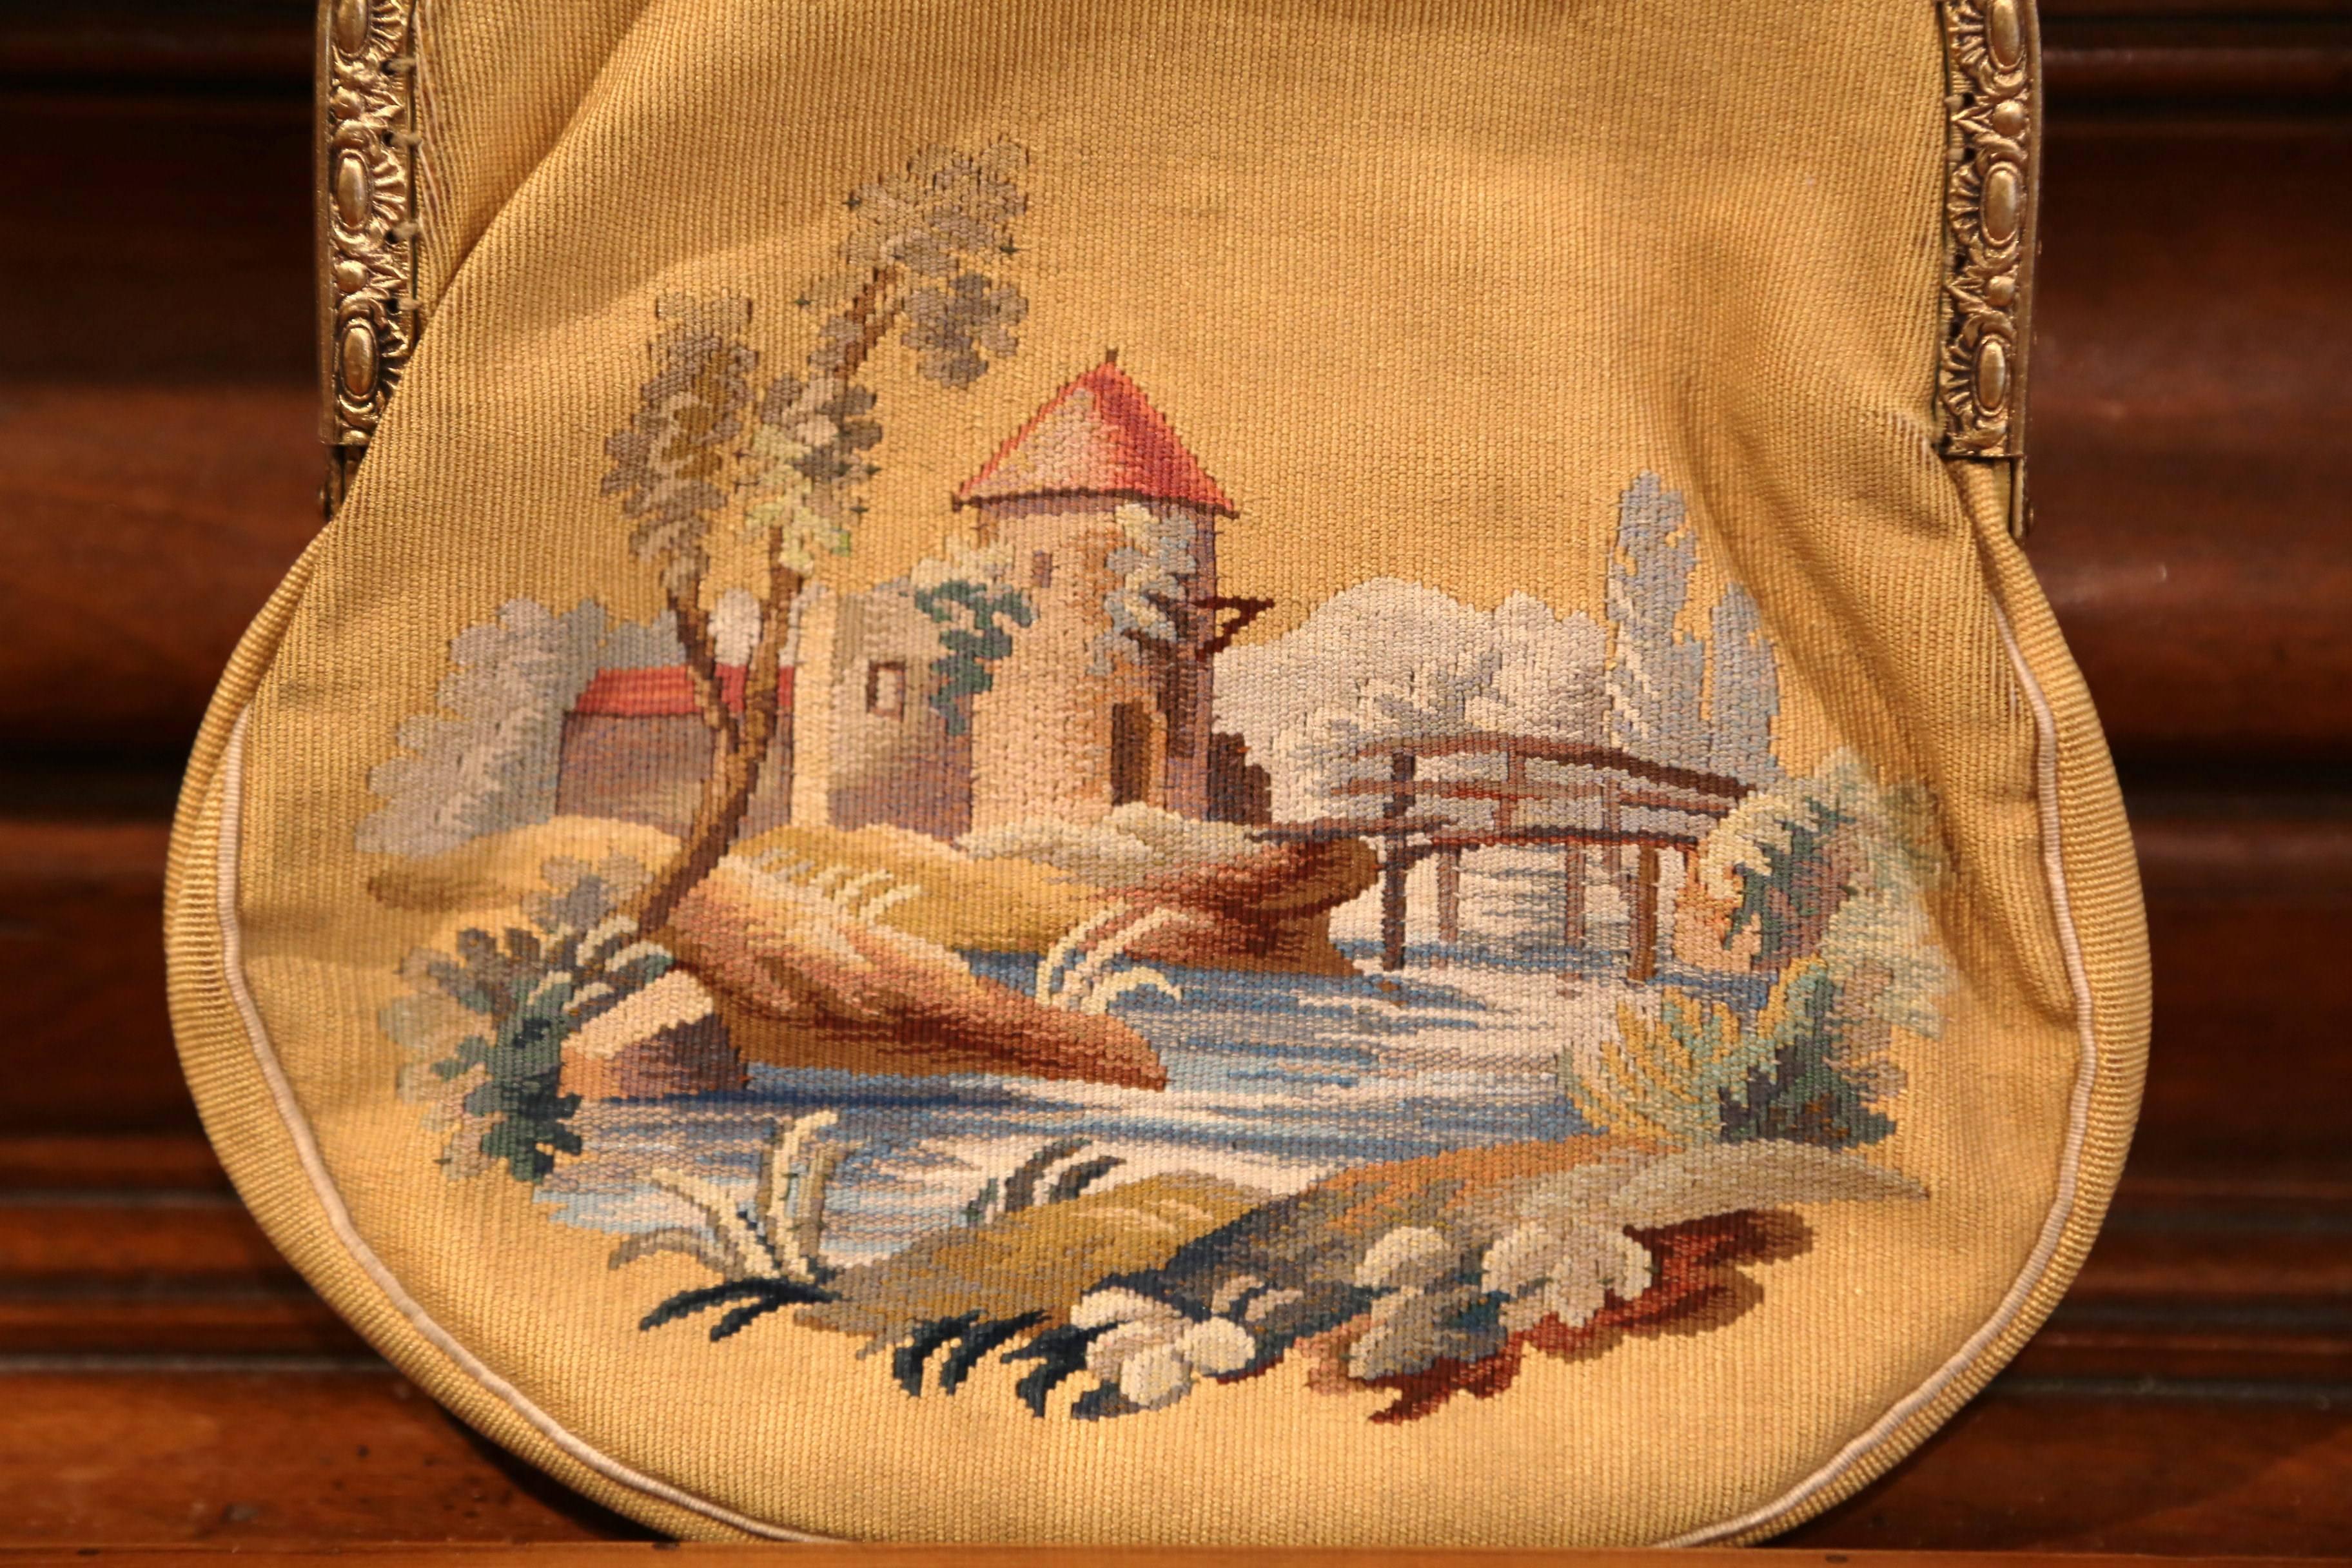 This elegant ladies purse was handwoven in France, circa 1860. The small, antique purse is handmade using colorful Aubusson tapestry. The tapestry features two different scenes. On one side of the purse, there is a young gentleman playing the flute